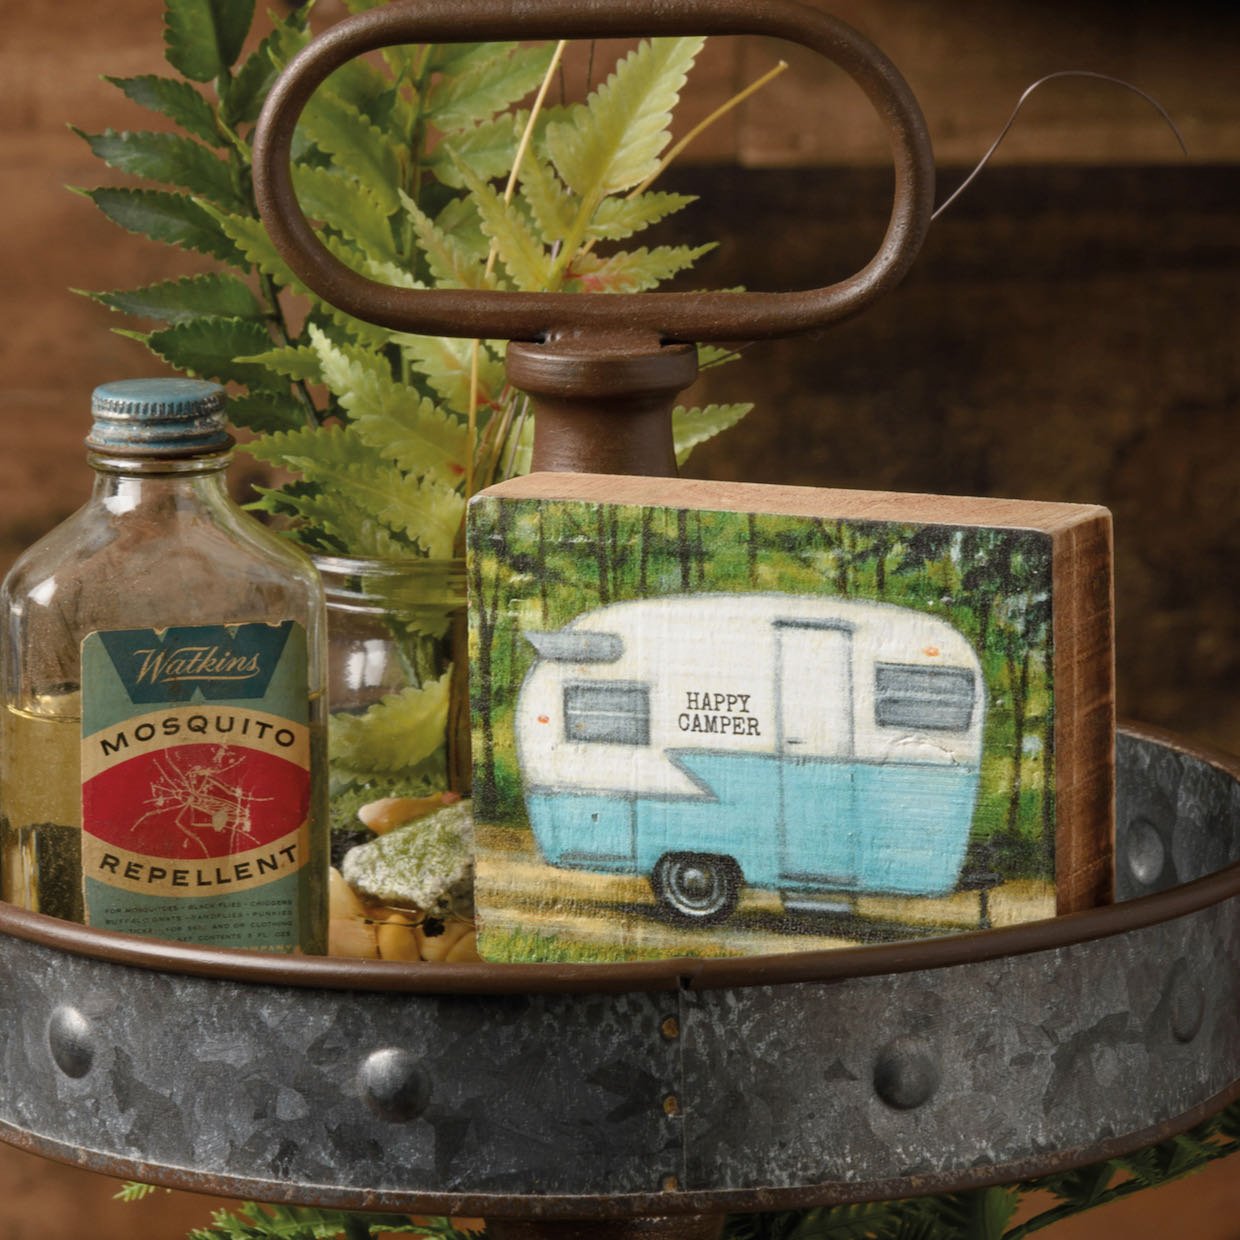 Happy Camper Rustic Wooden Block Sign Vintage Canned Ham Travel Trailer - Marmalade Mercantile